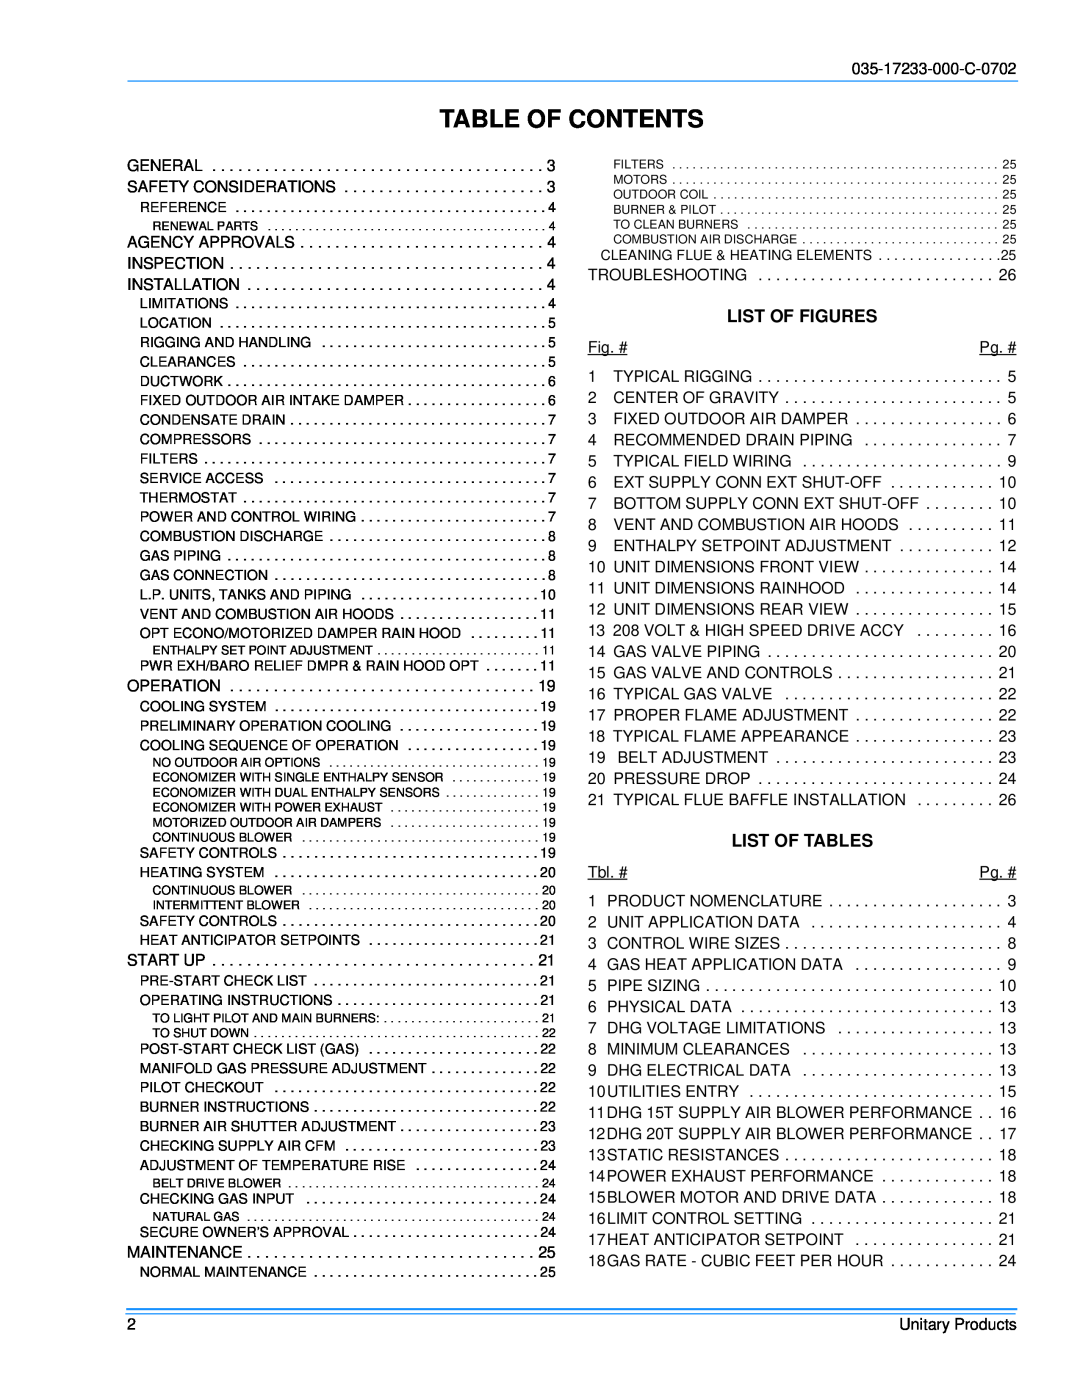 Energy Tech Laboratories DHG240, DHG180 installation instructions Table Of Contents, List Of Figures, List Of Tables 